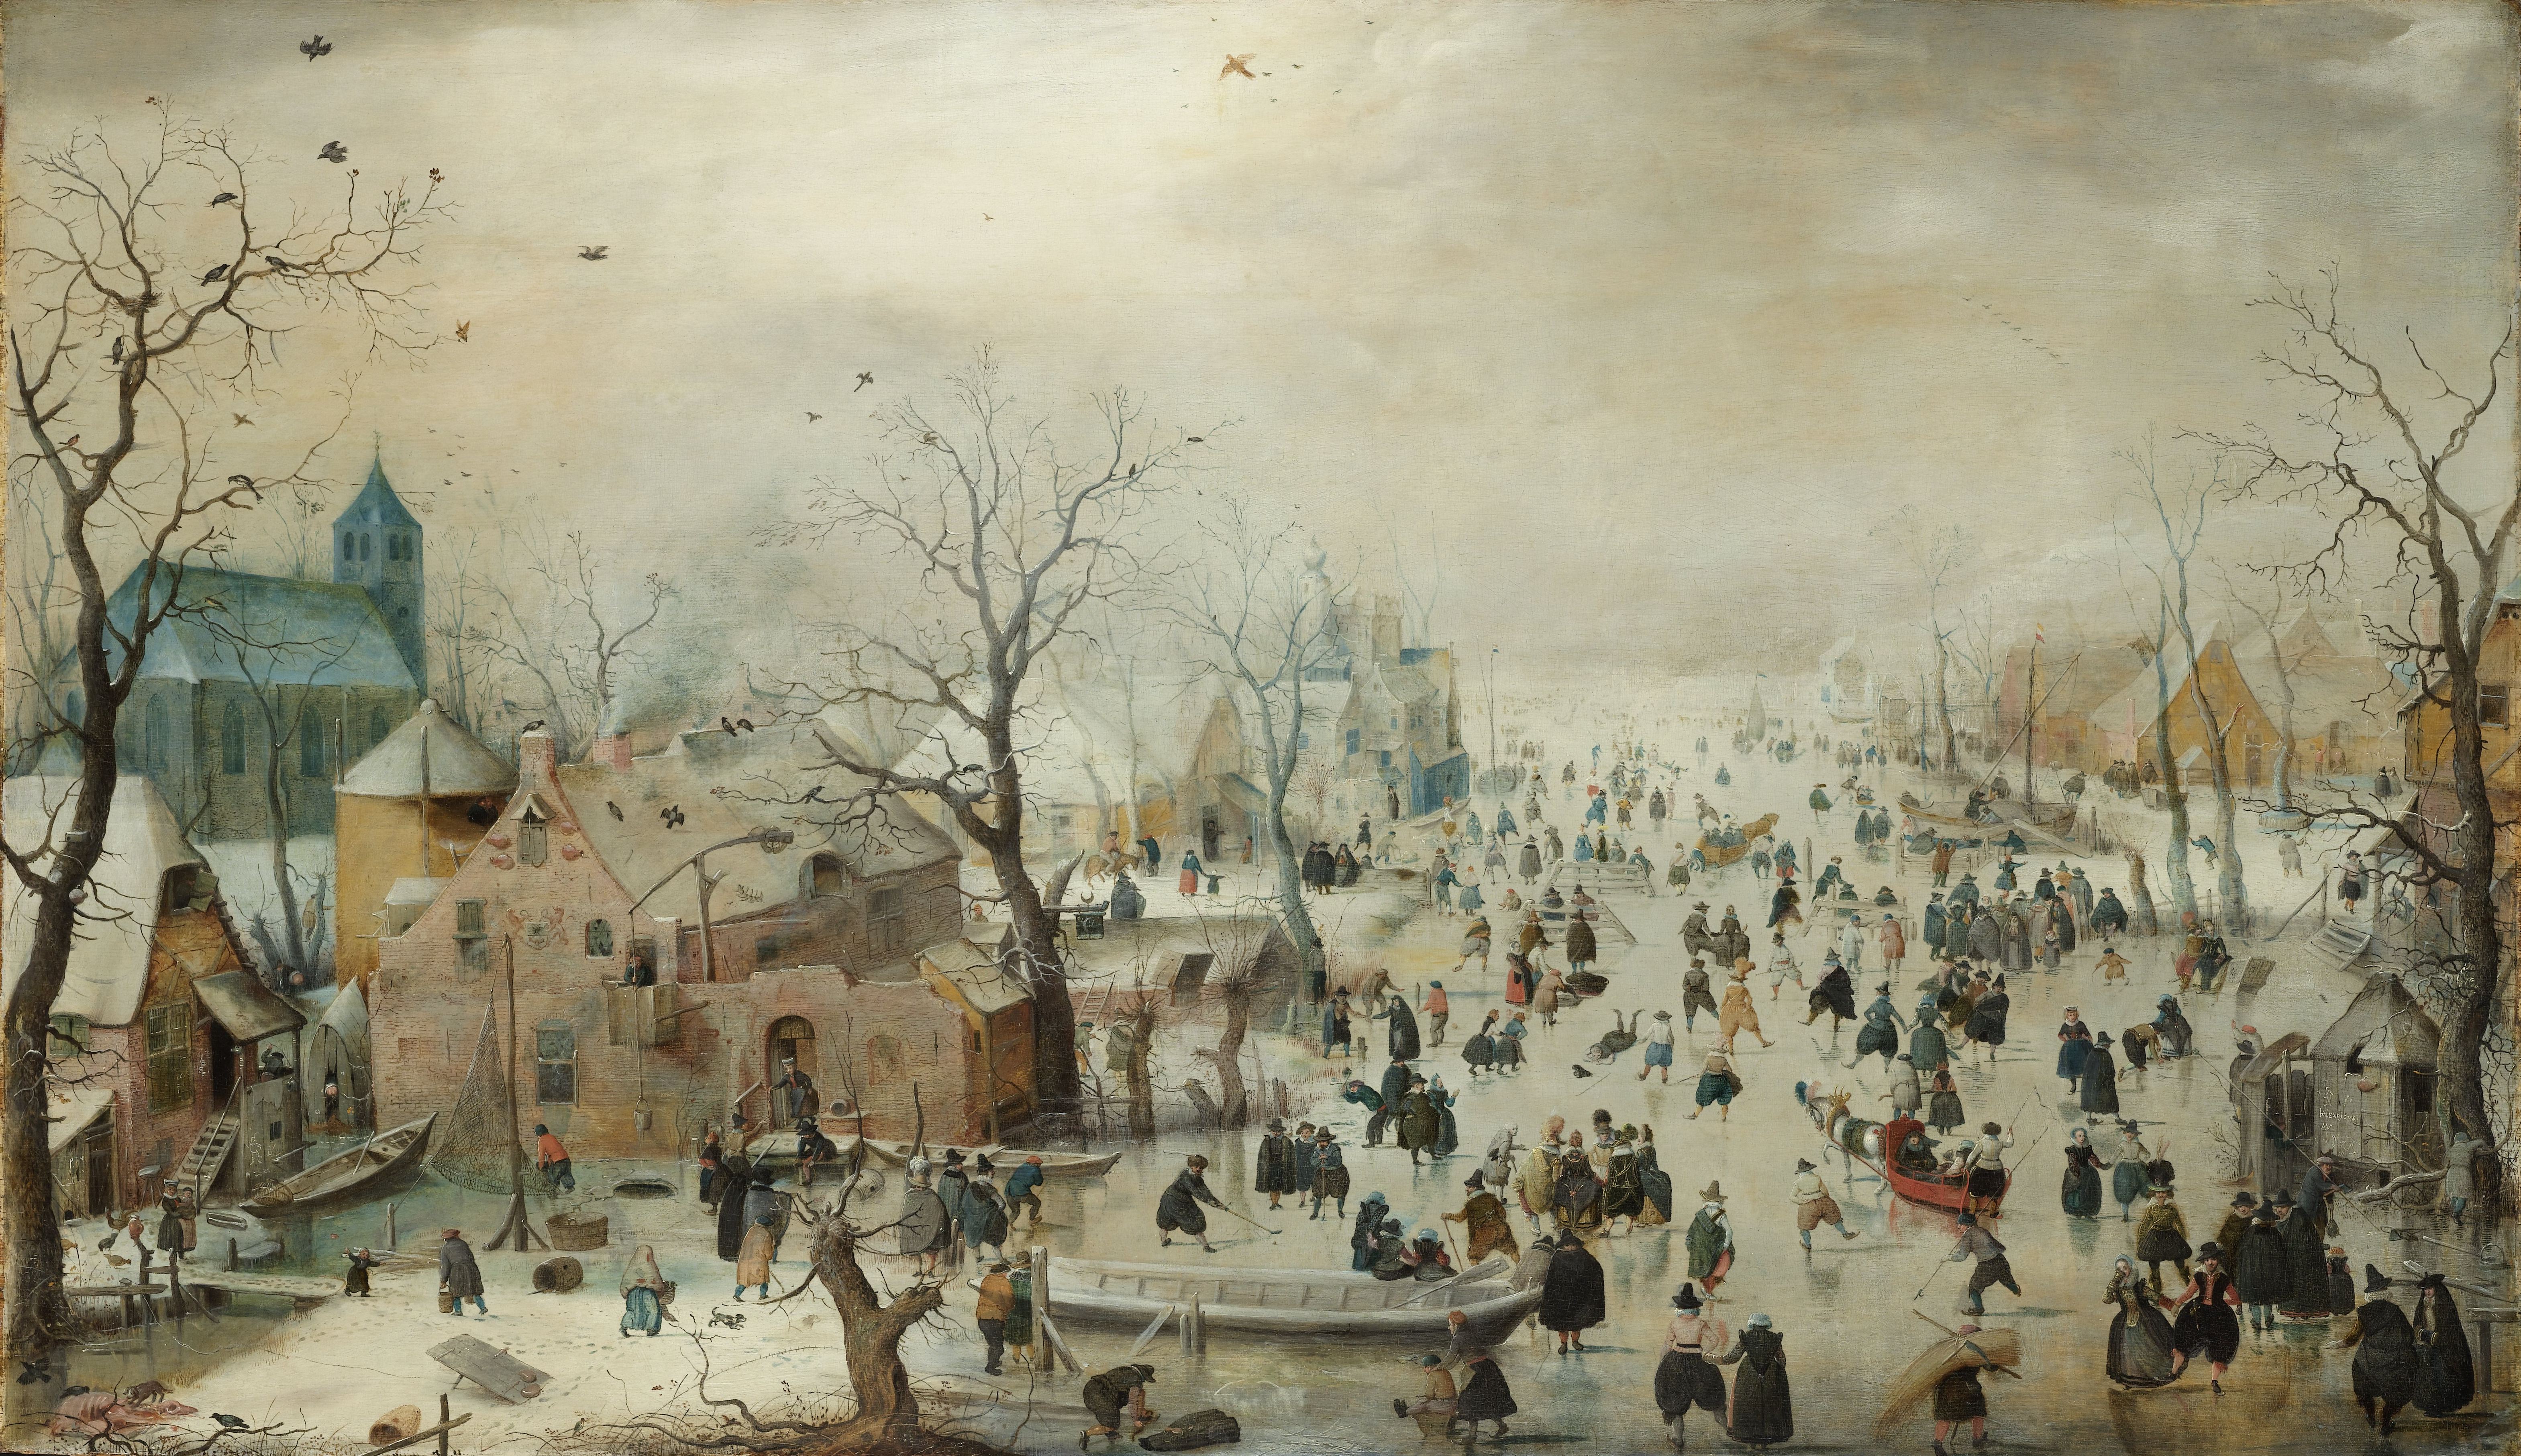 People skating on the ice in a Dutch winter